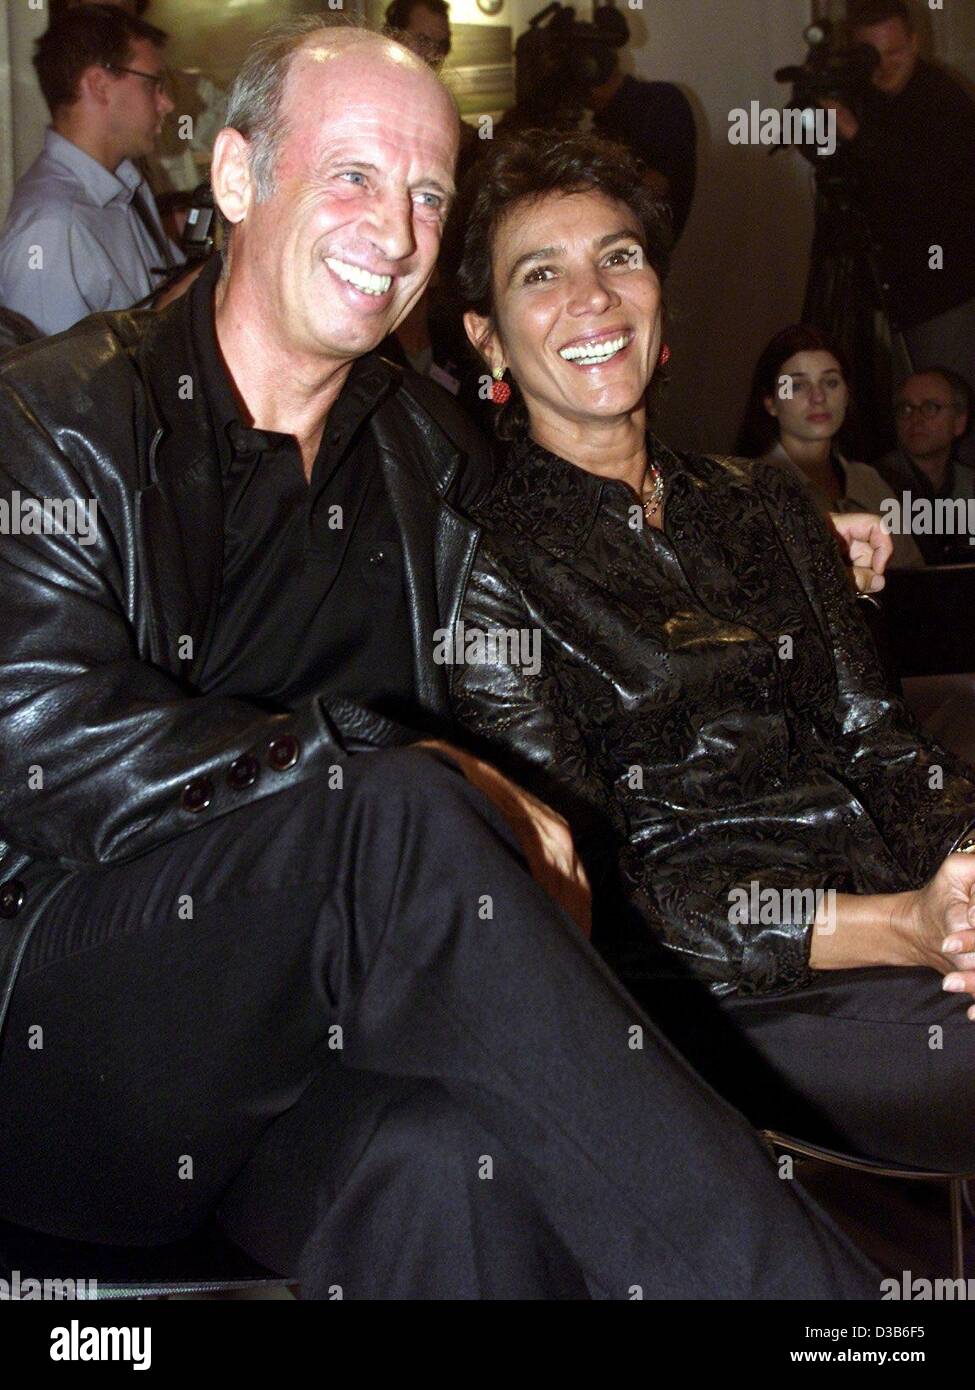 dpa) - Fashion producers Willy and Sonia Bogner are all smiles at a BMW  fashion show in Barcelona, 26 April 2001. Willy Bogner took over the  sportswear and fashion company from his